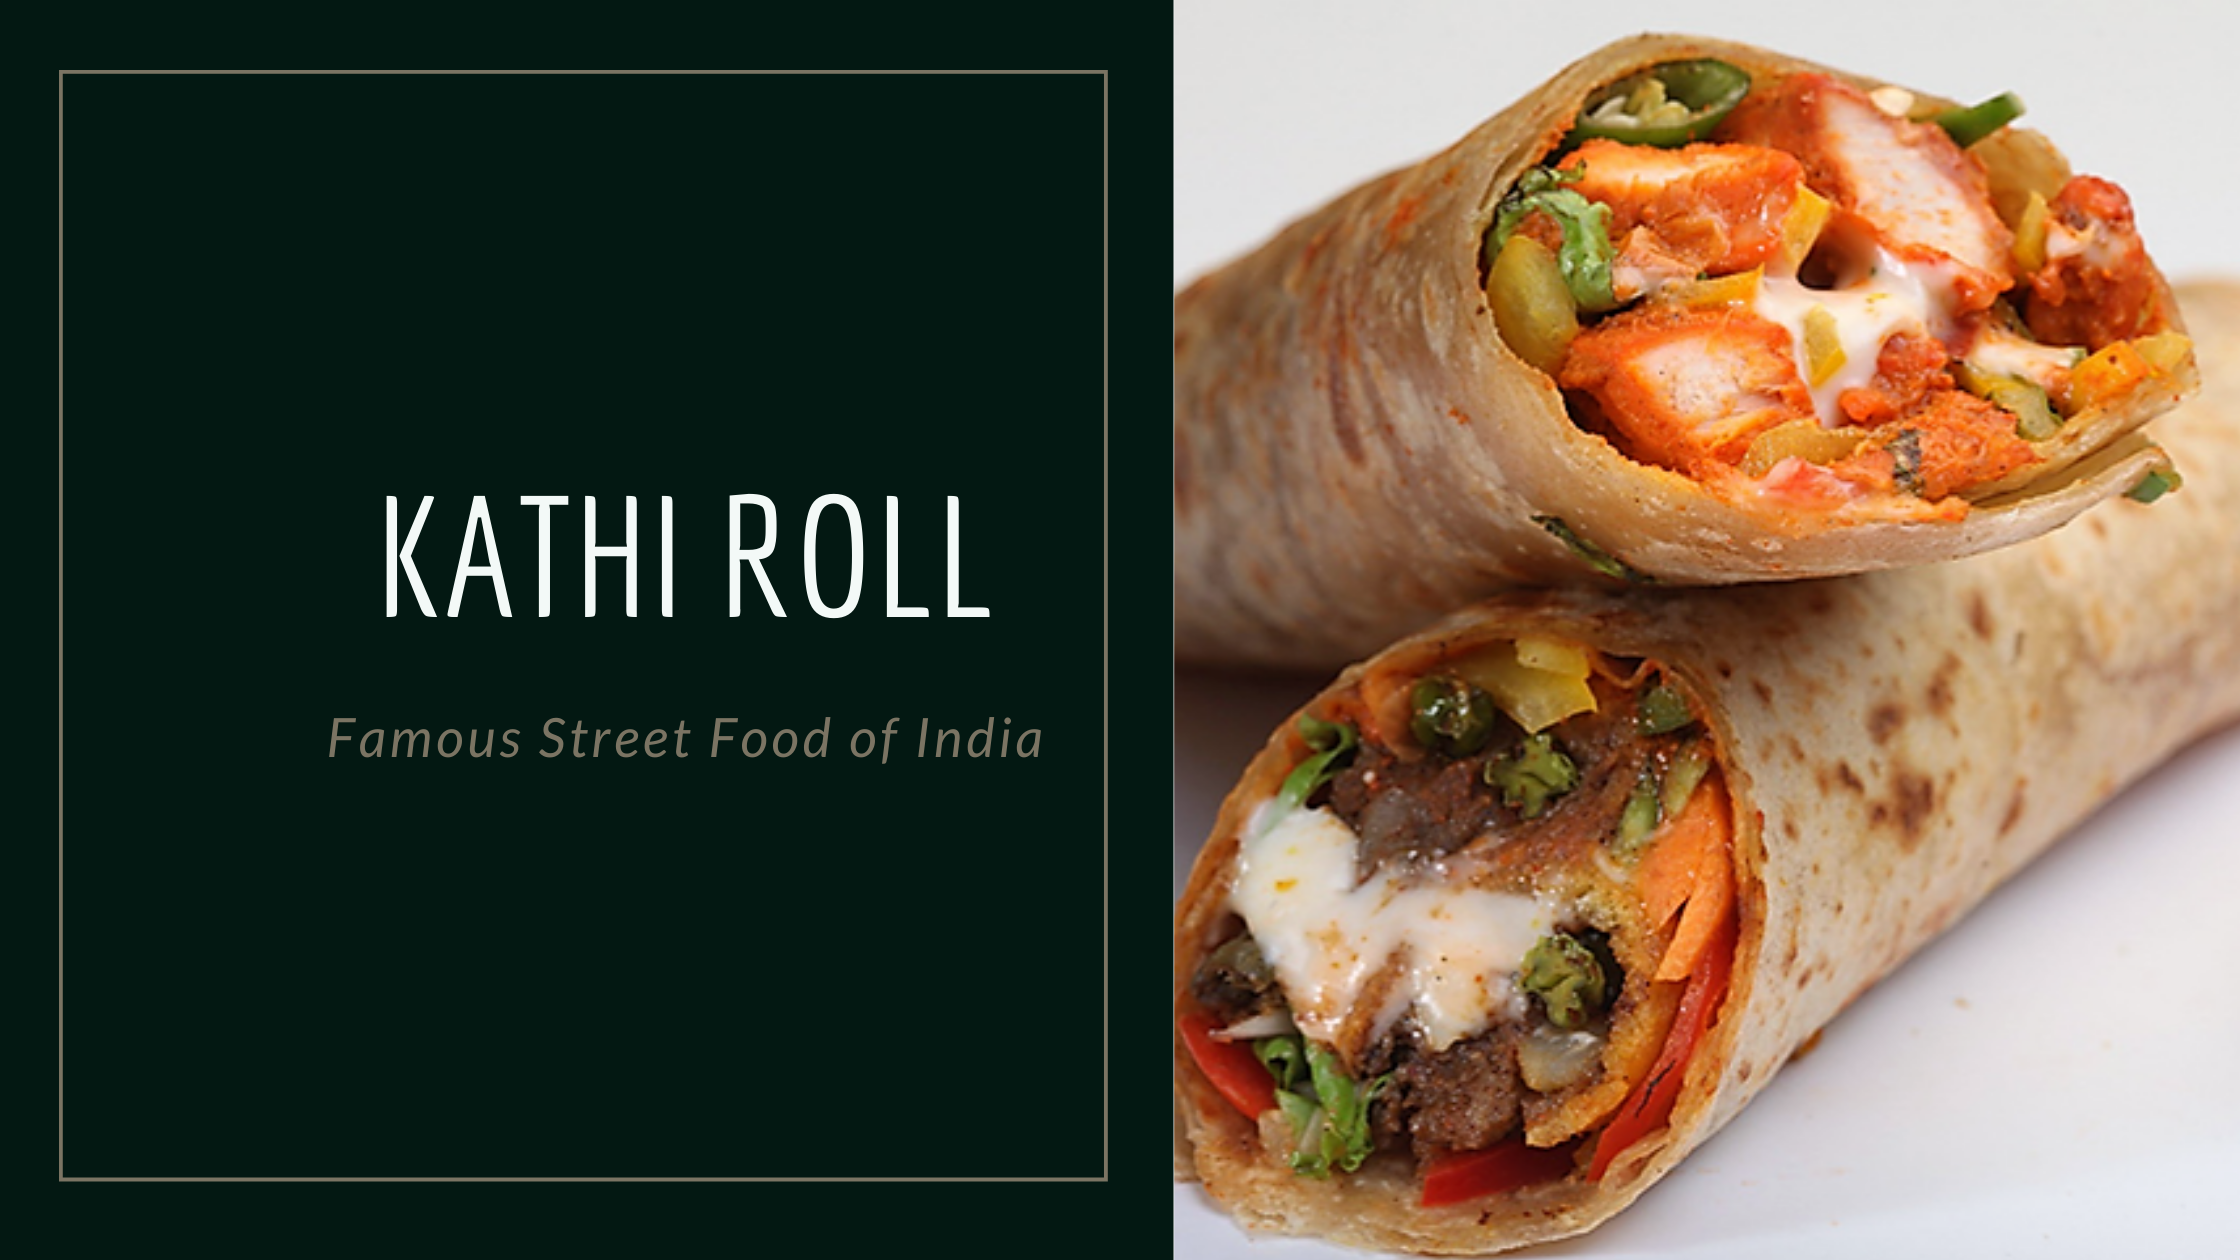 Kathi Roll Recipe by Chef Ankit